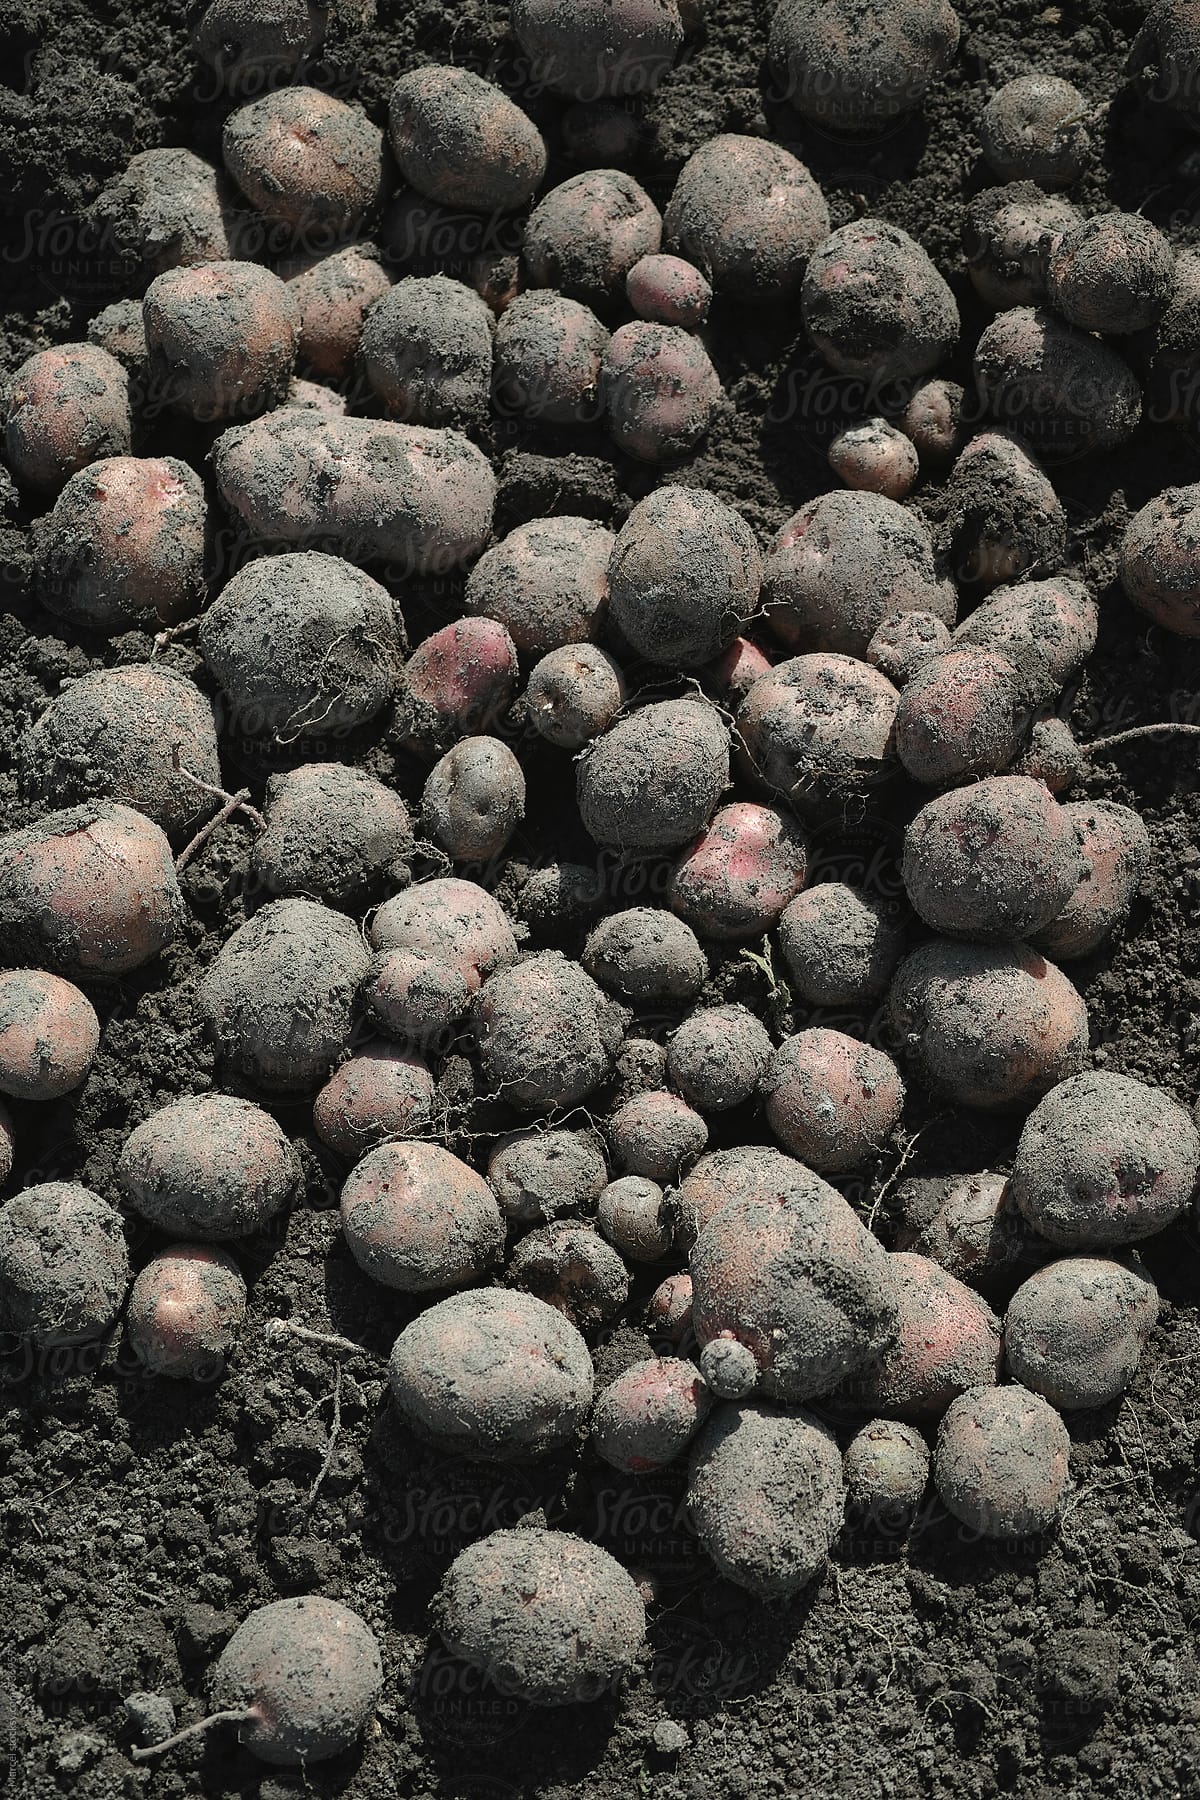 Harvested potatoes in a vegetable garden